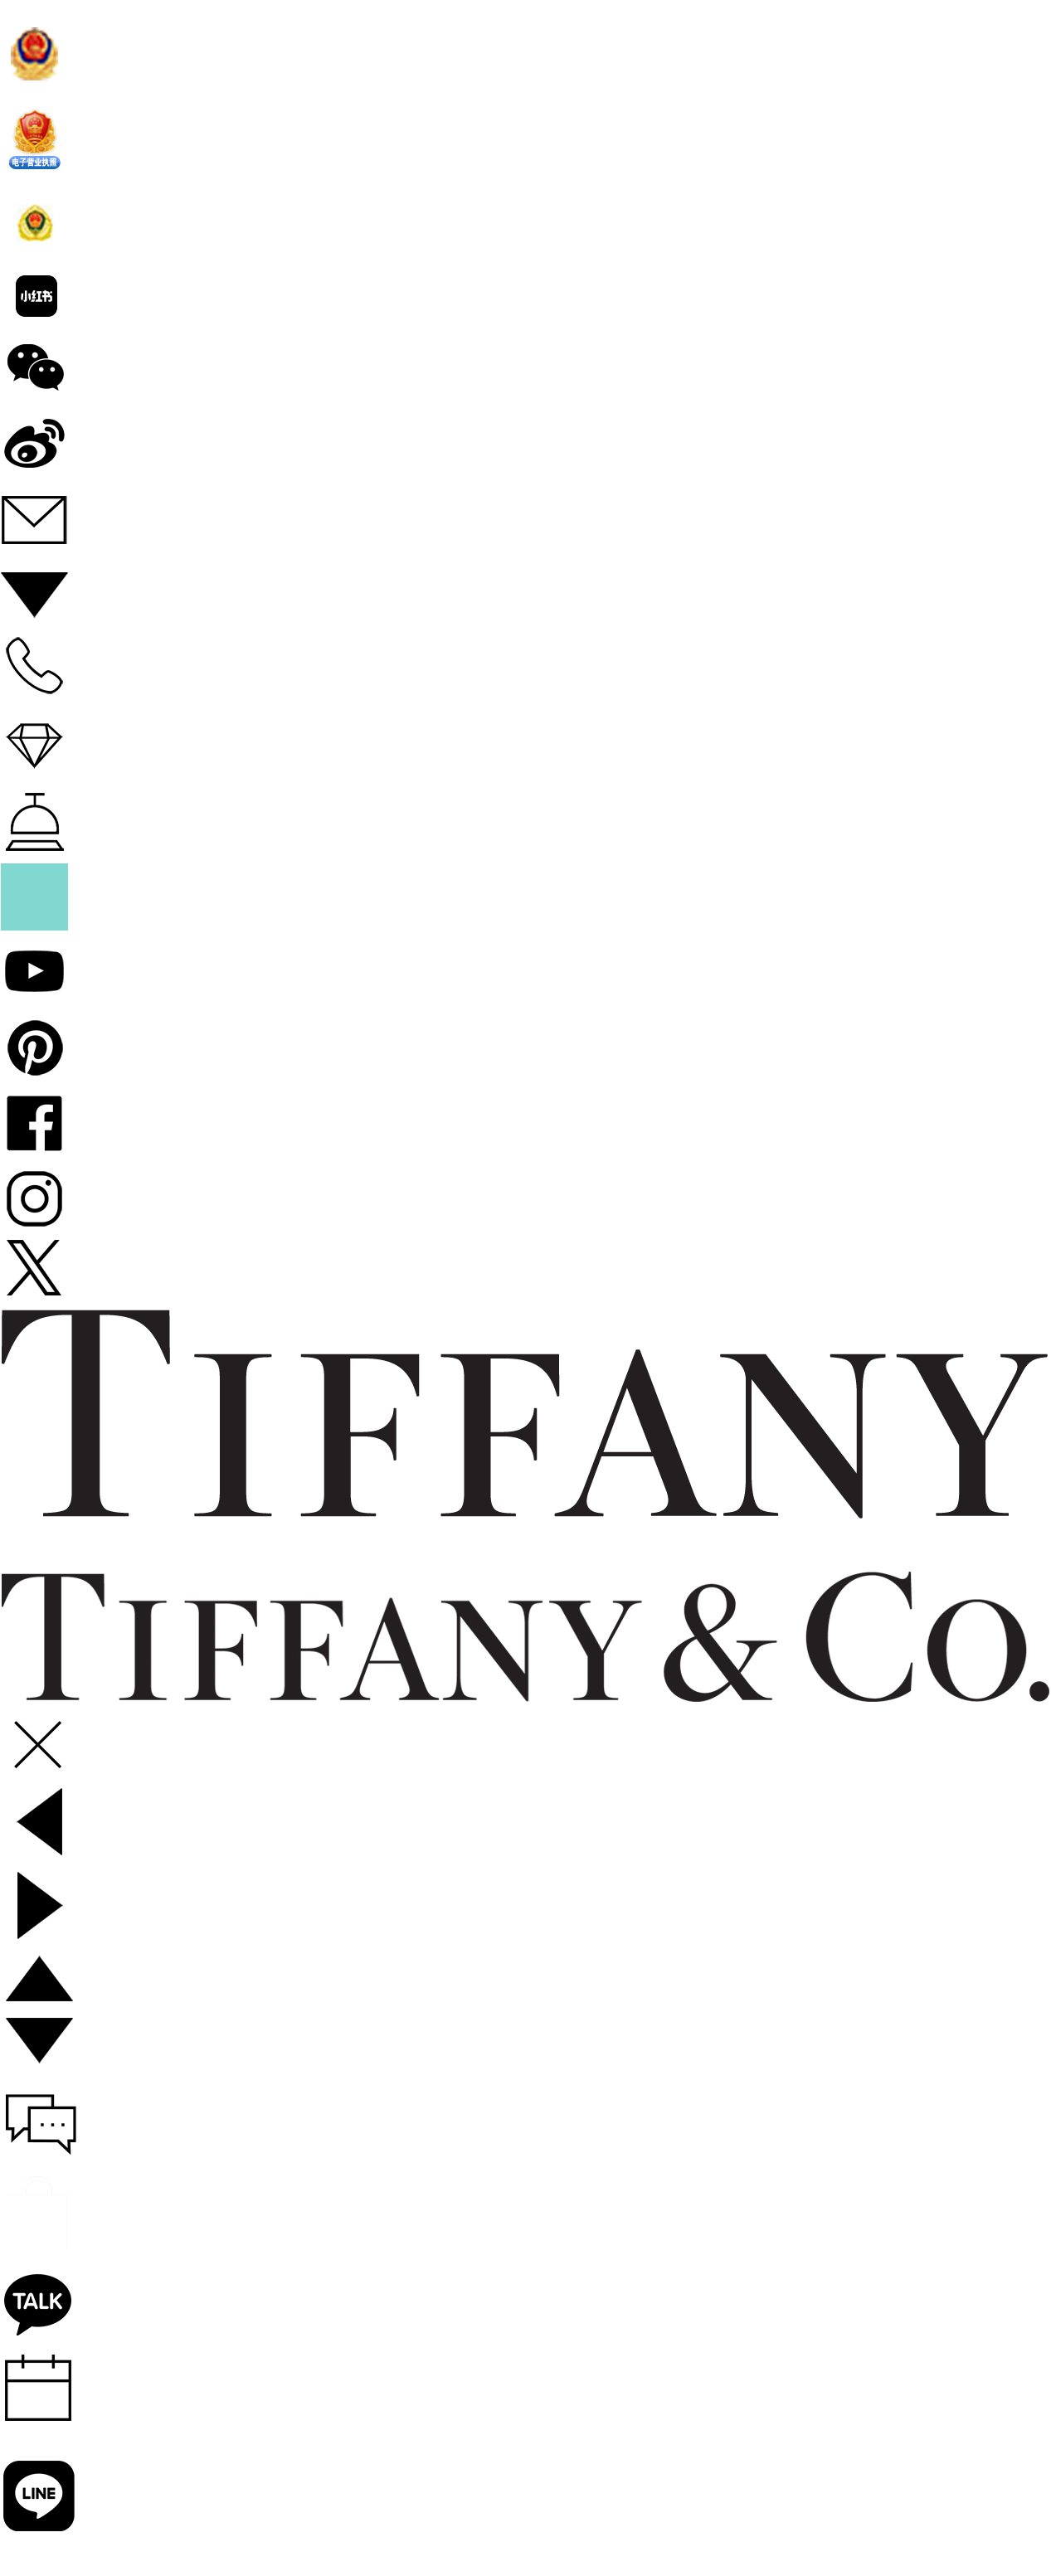 Tiffany & Co. Packaging ORDER UPGRADE ONLY! Do Not Purchase Alone!!!